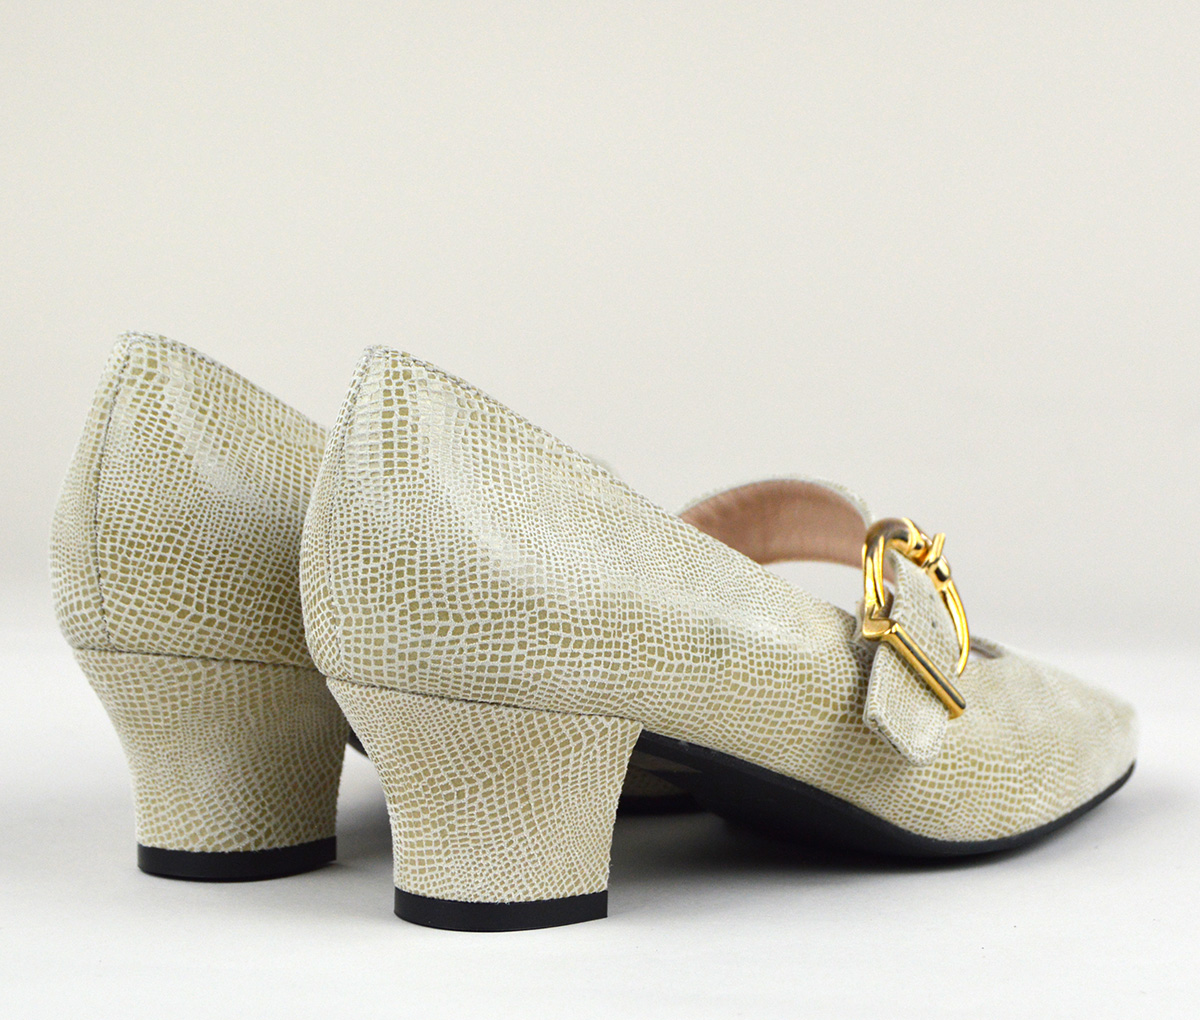 Modshoes Cream Textured Effect Leather 60s Mary Janes Style Shoes The Lola 06 1 